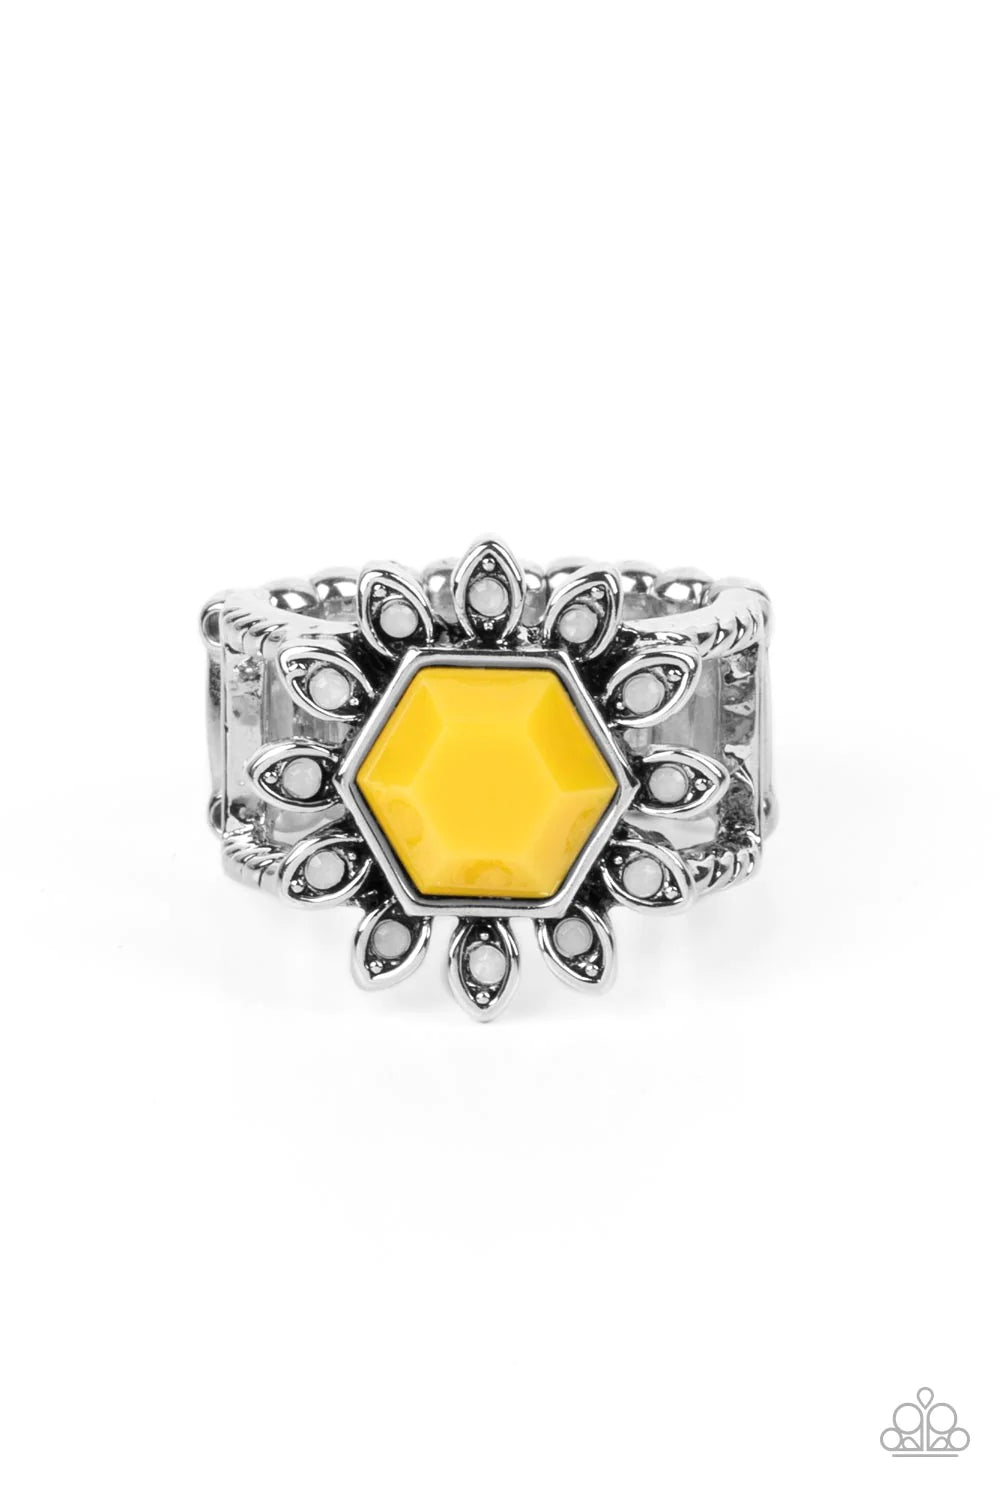 Paparazzi Accessories Wonderfully Wallflower - Yellow A hexagon-shaped Samoan Sun bead is pressed into the center of an antiqued silver frame. Dainty silver petals dotted with white opalescent centers radiate around the defaced bead creating a whimsical a